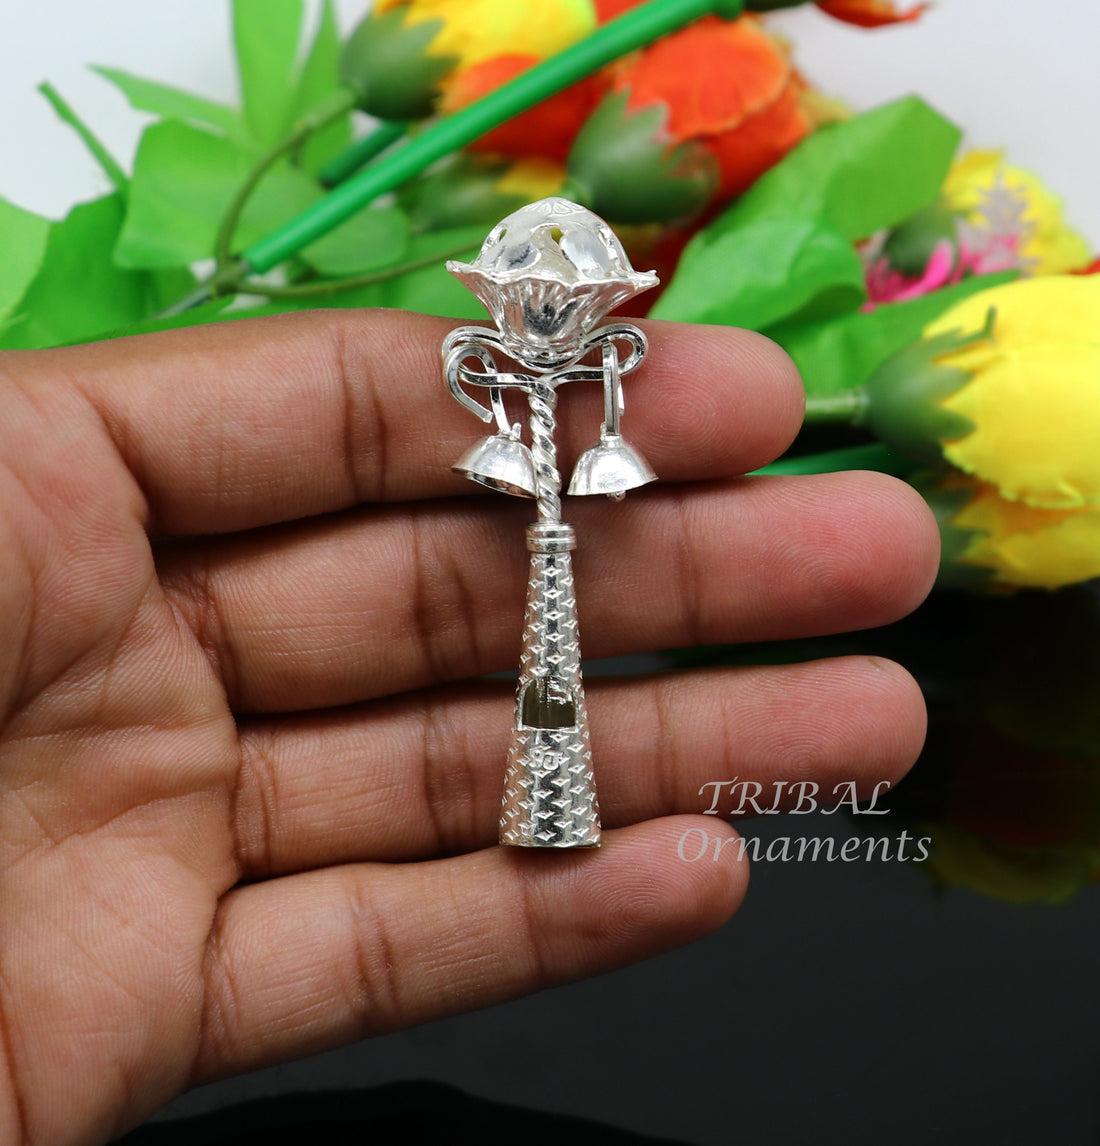 Solid sterling silver handmade design new born baby gifting bells toy, baby krishna gifting toy, silver whistle, silver temple article su862 - TRIBAL ORNAMENTS